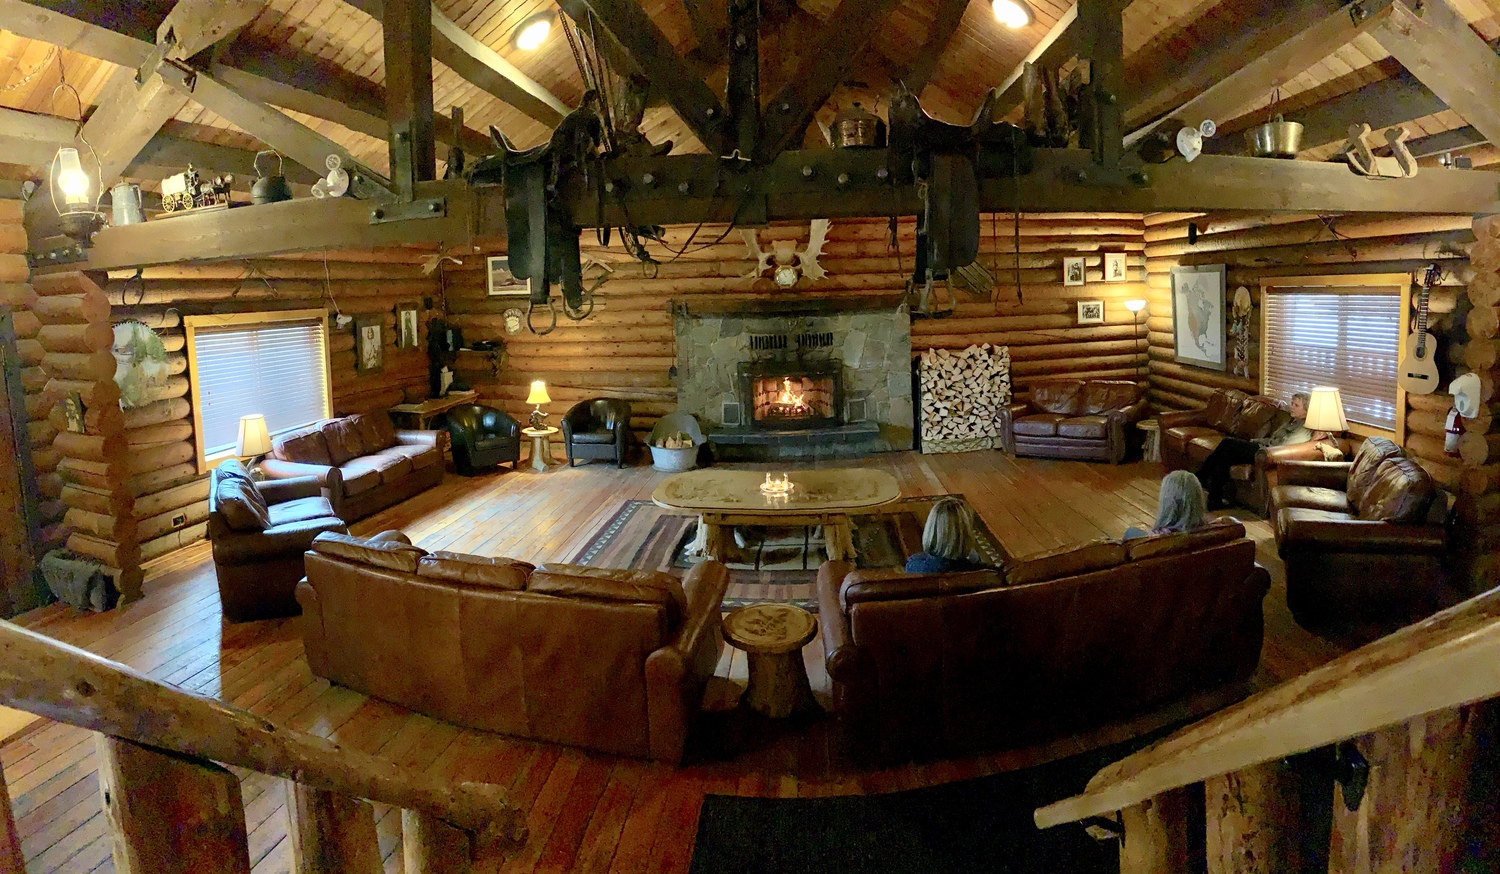 Gallery Photo of The Lodge